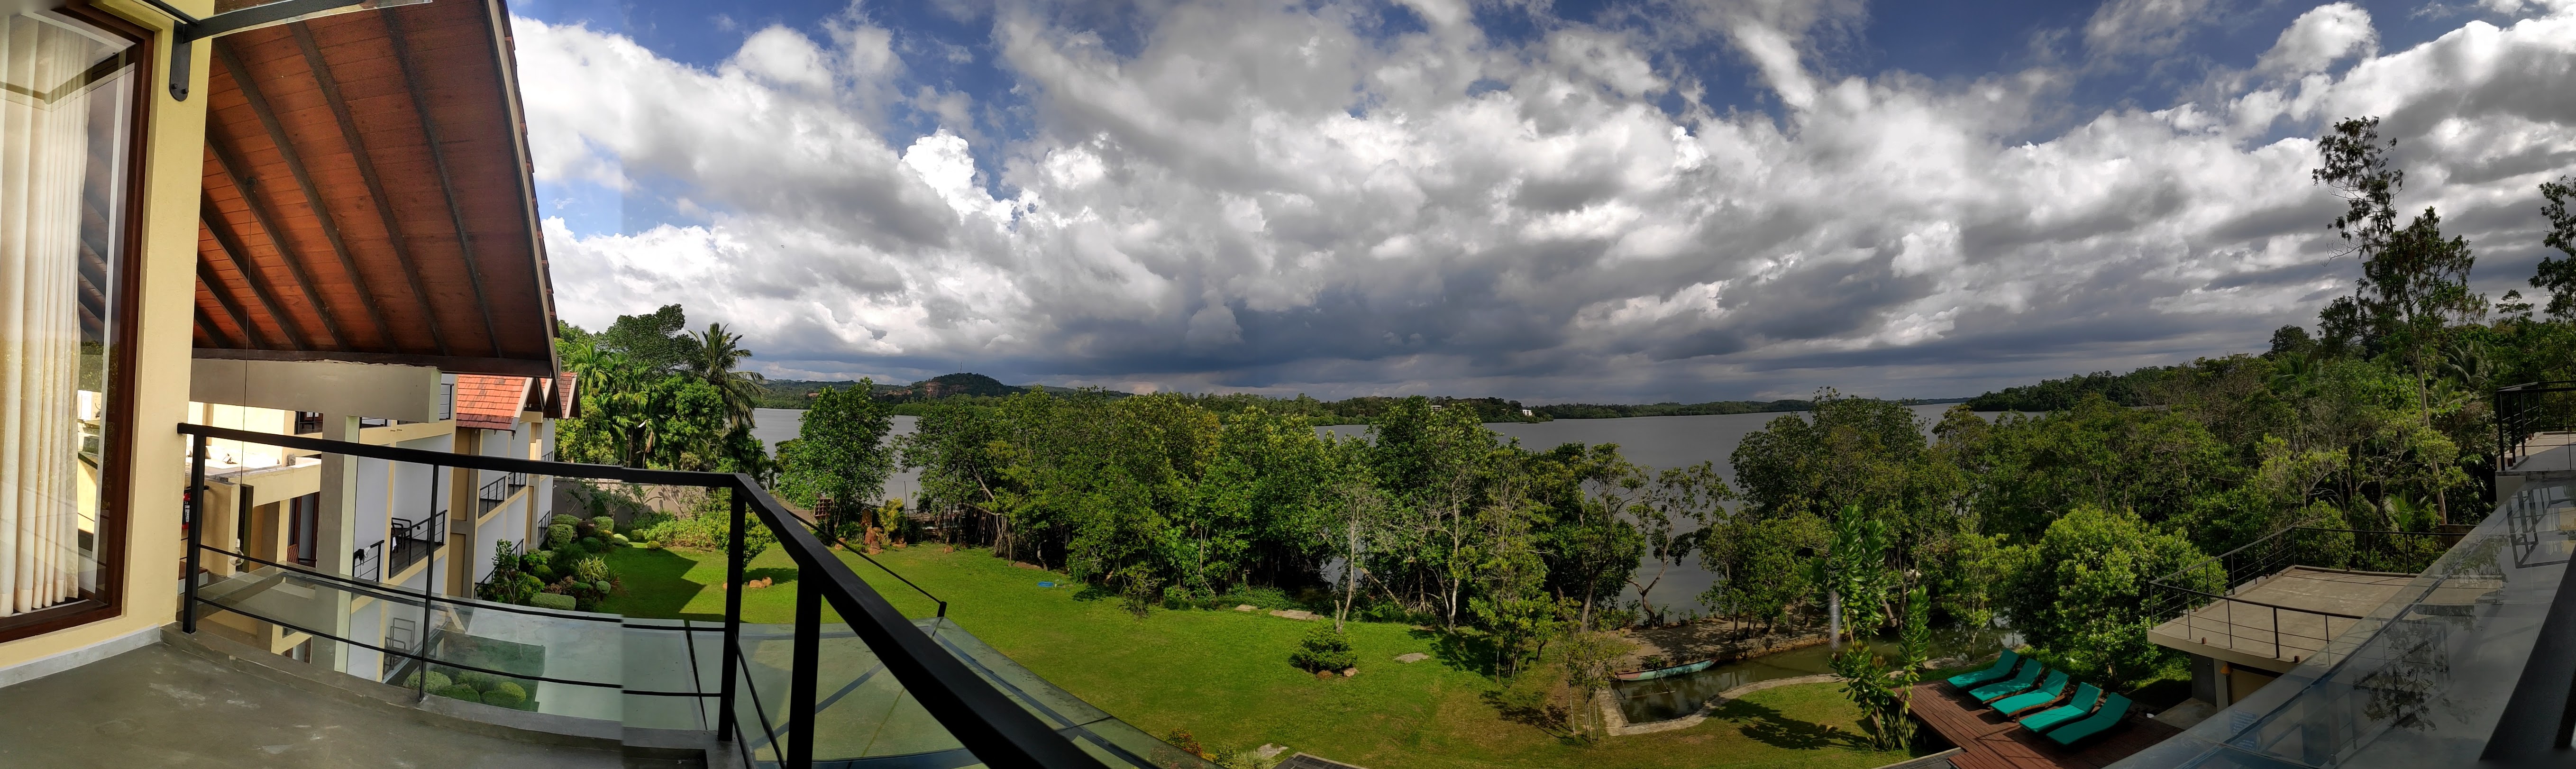 360 view from the balcony